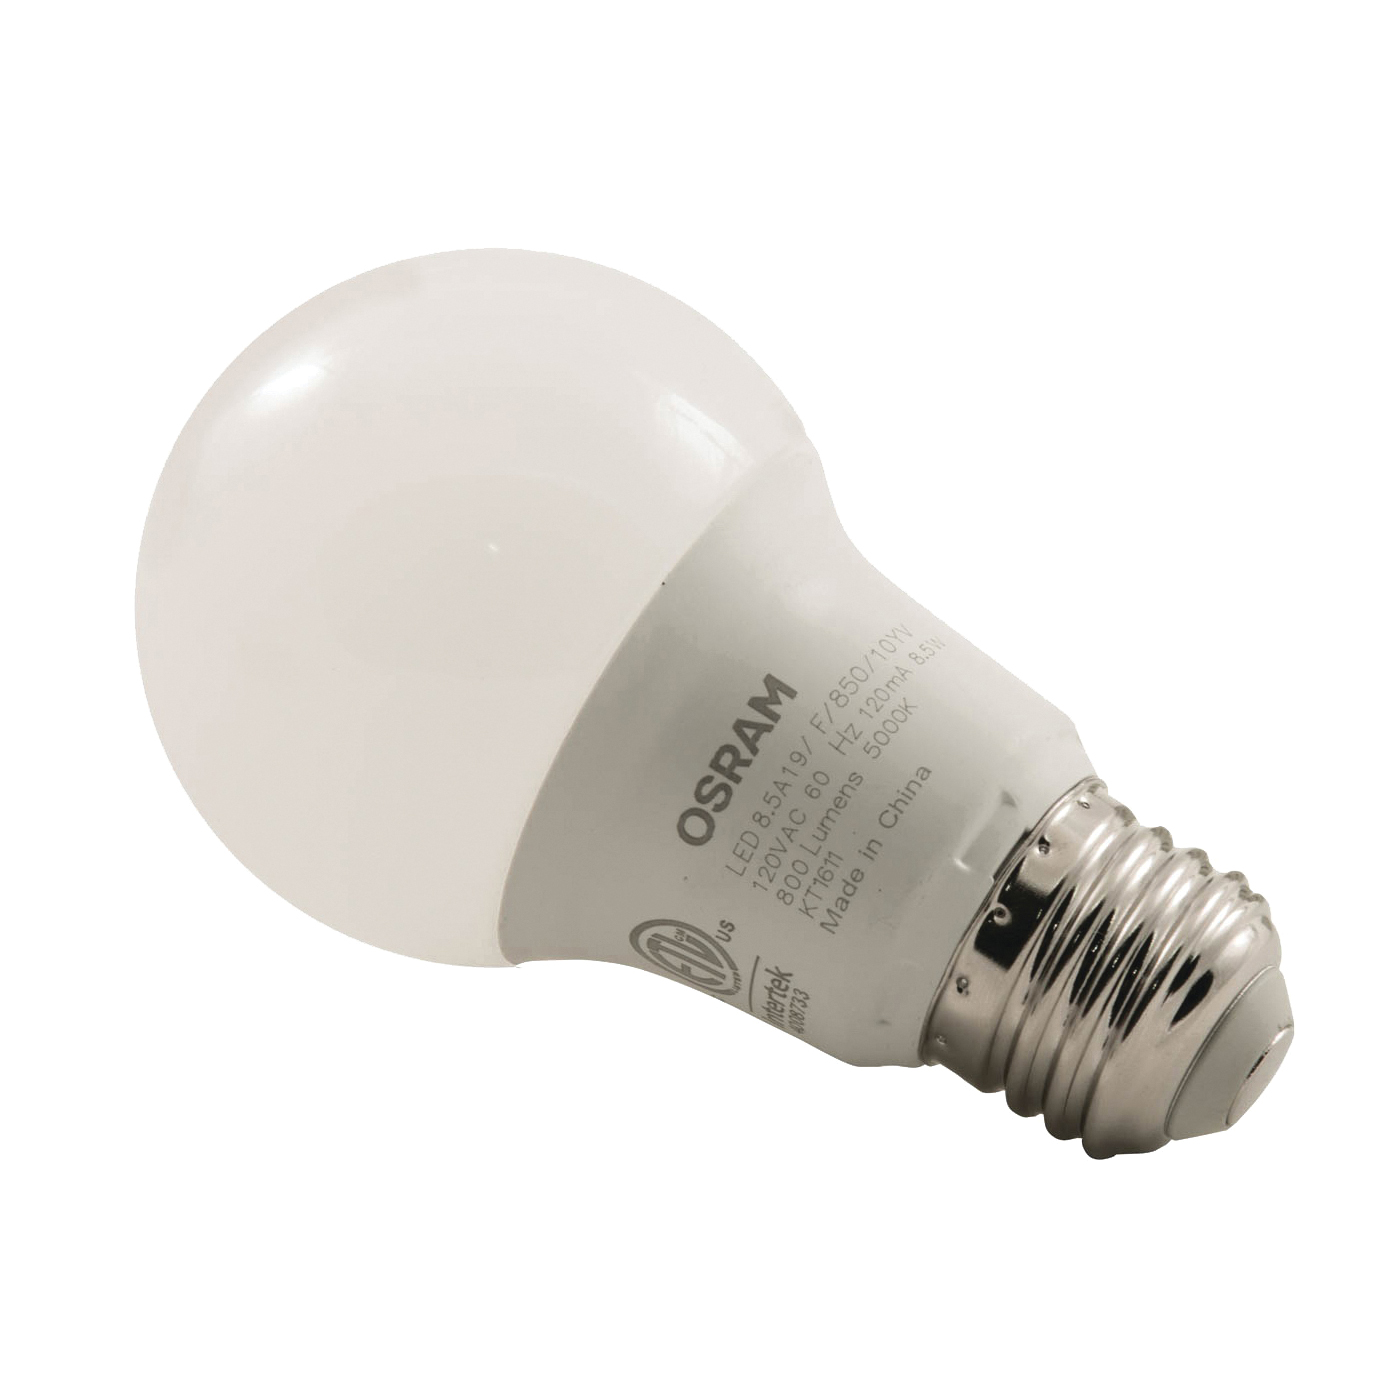 79284 LED Bulb, General Purpose, A19 Lamp, 60 W Equivalent, E26 Lamp Base, Frosted, Bright White Light